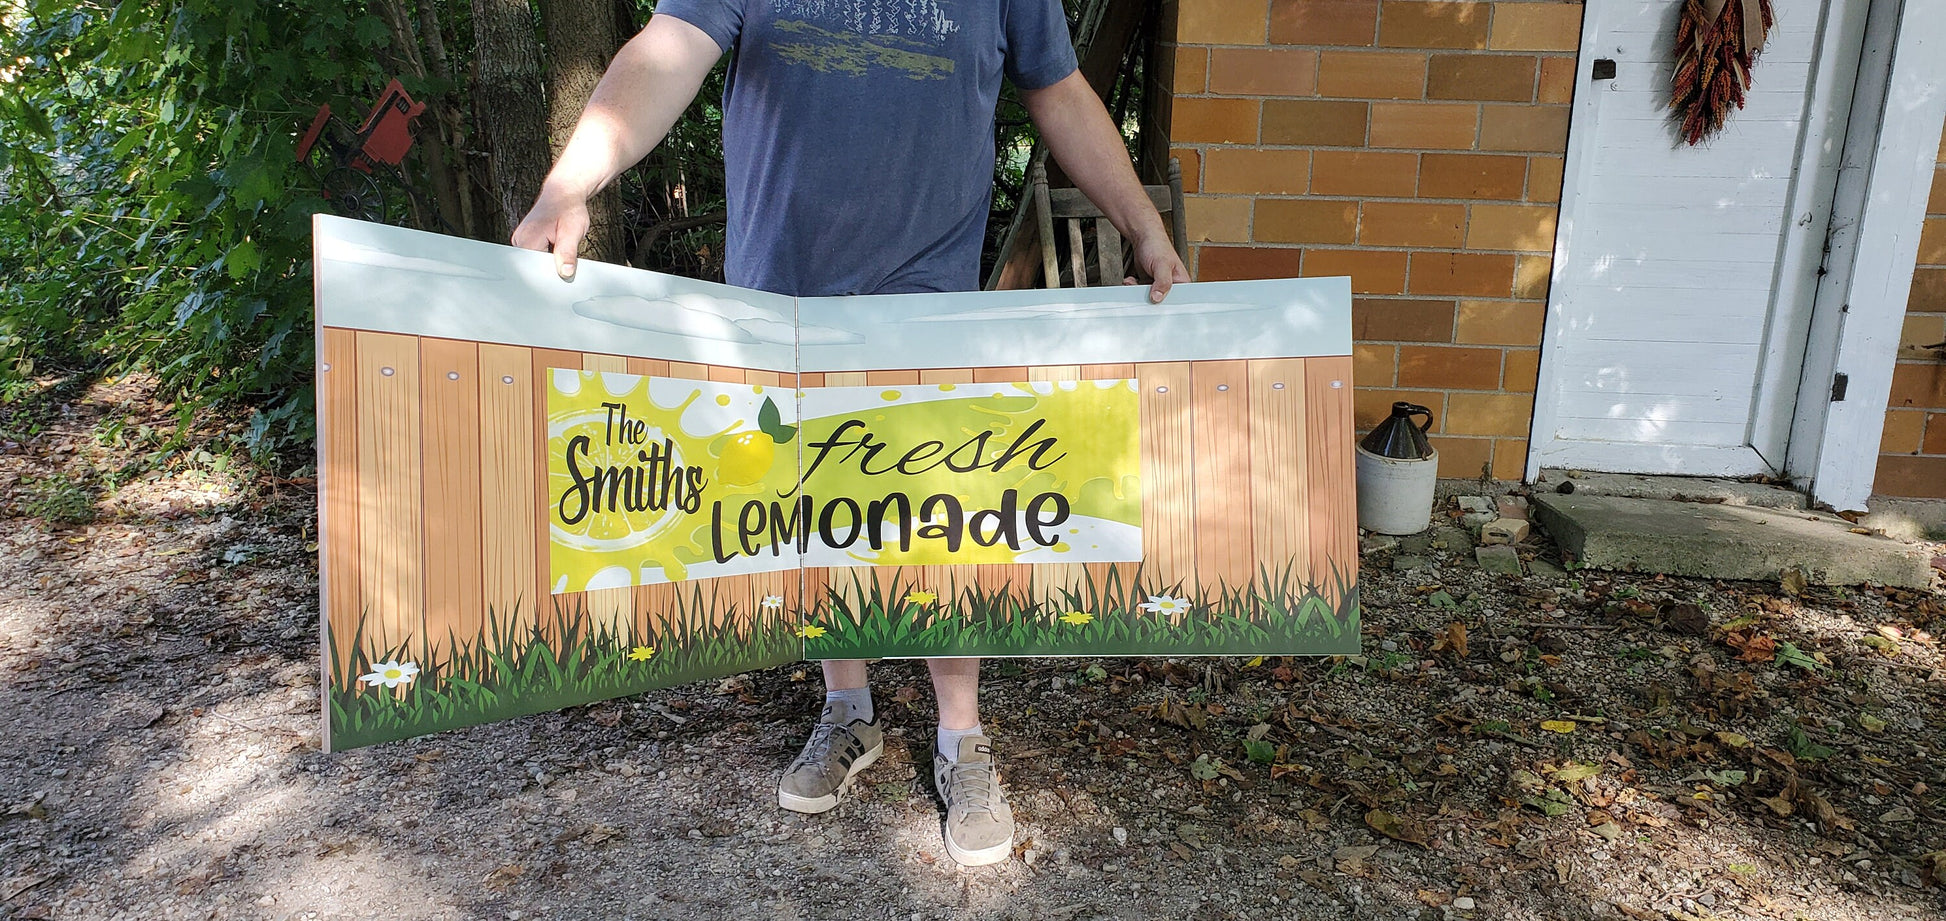 Lemonade Stand Sign Extra Large Custom Personalized with Your Name Free Standing Folding UV Printed Wood Business Huge Lemons Advertising